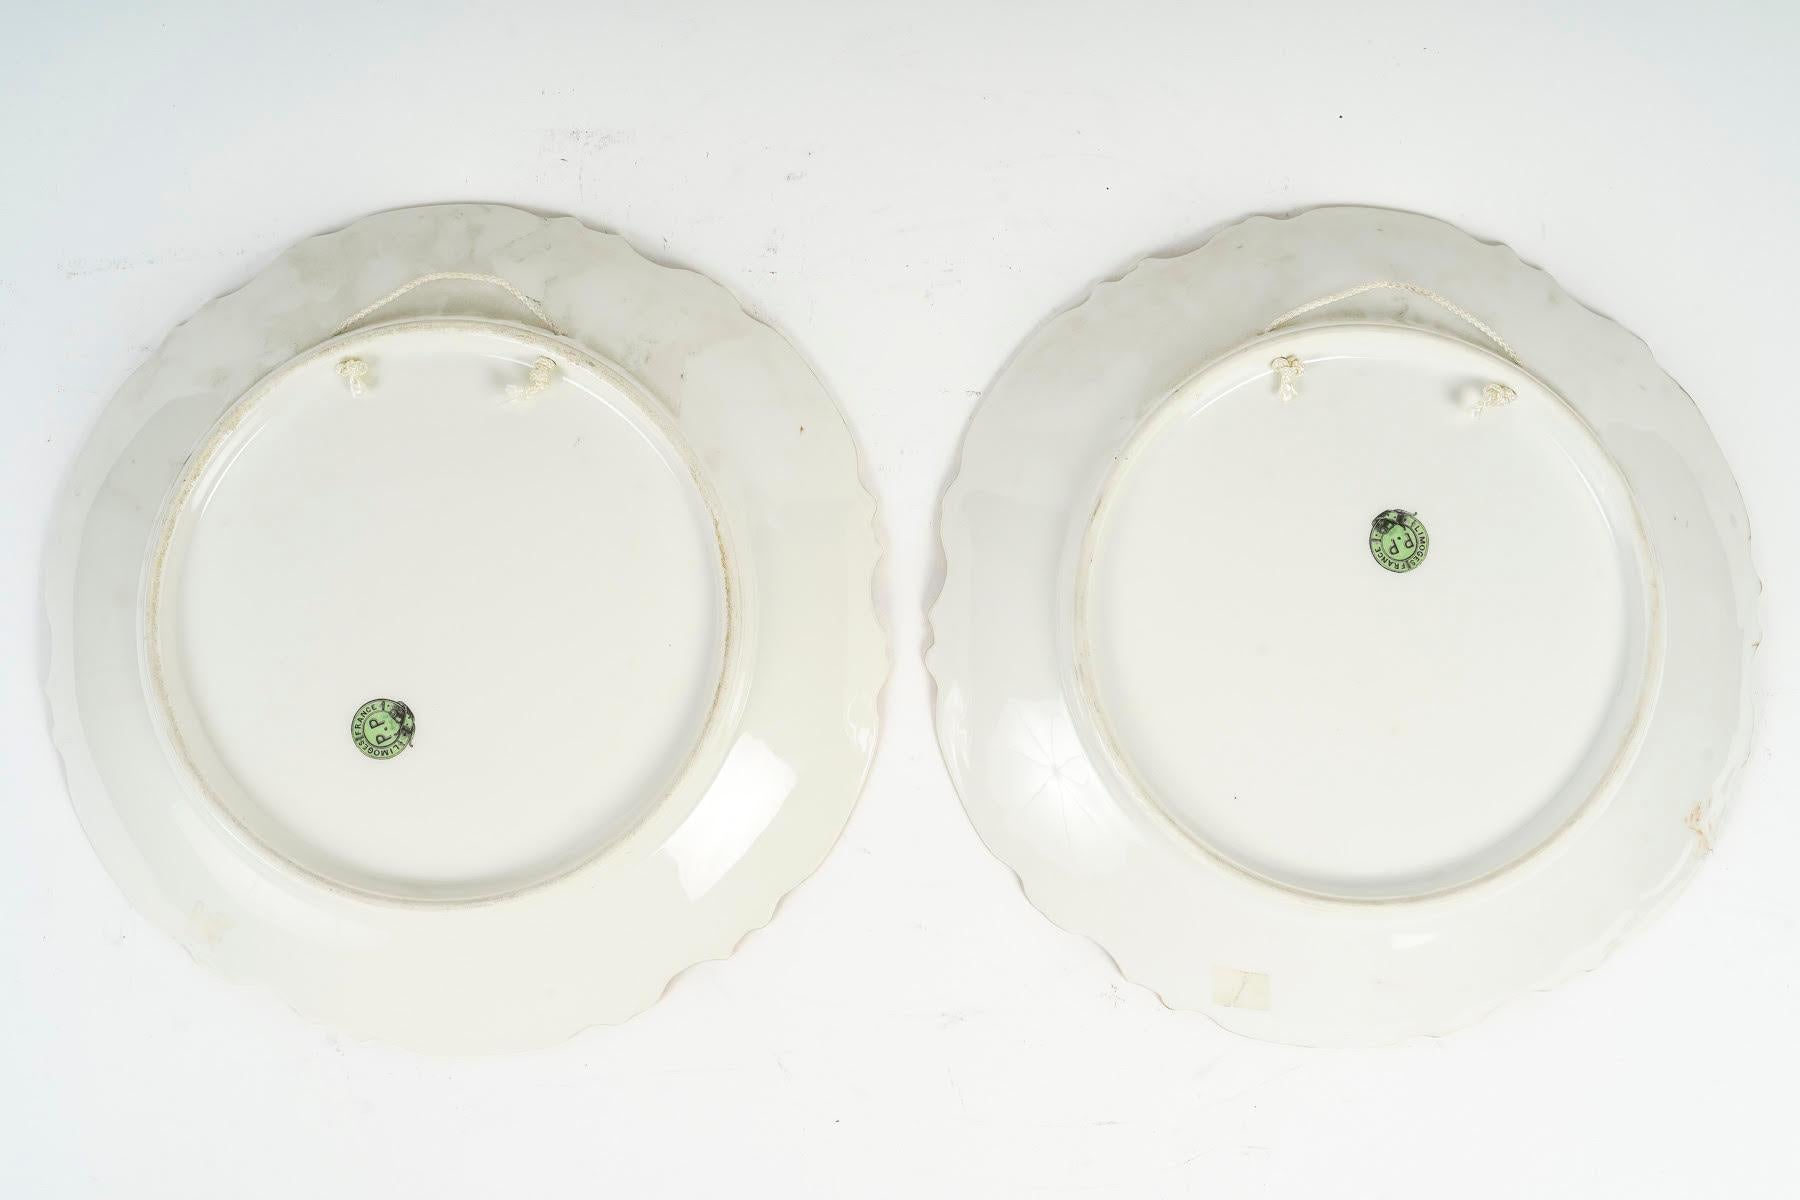 Pair of Decorative Dishes, Manufacture of Porcelain of Limoges. For Sale 2